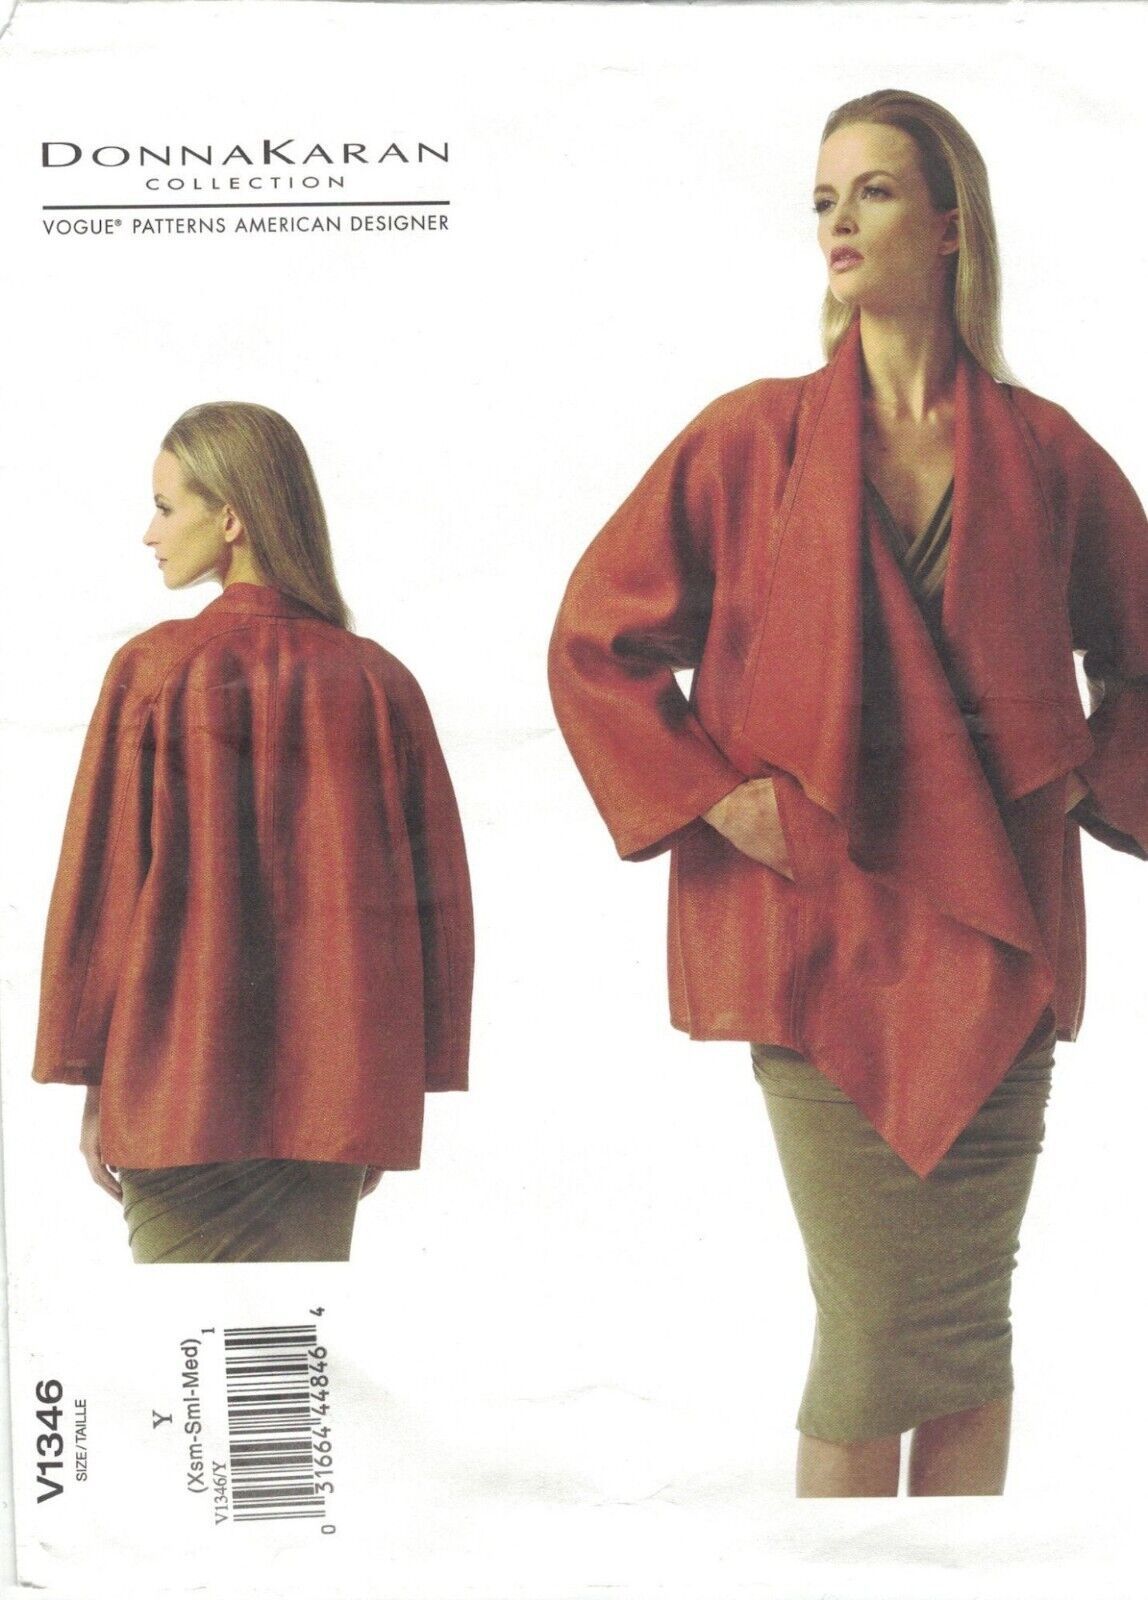 Primary image for Vogue 1346 Donna Karan Unlined Waterfall Jacket Pattern Misses Size 4-14 Uncut